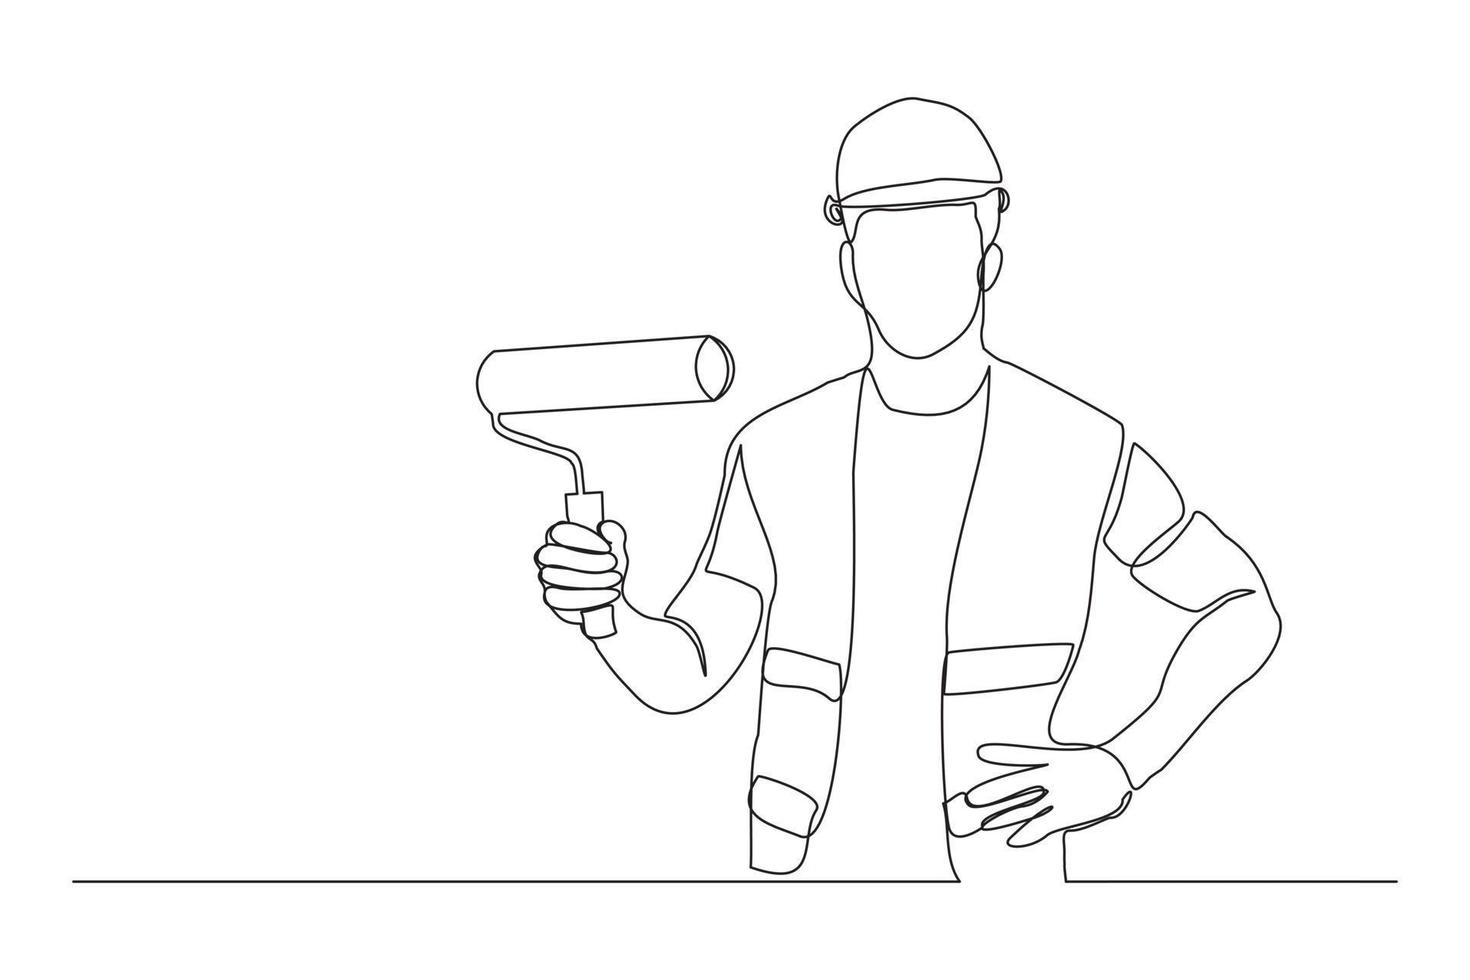 Continuous line drawing of young handyman wearing building construction uniform while holding paint roller. One single line painter wall renovation service concept. vector design illustration